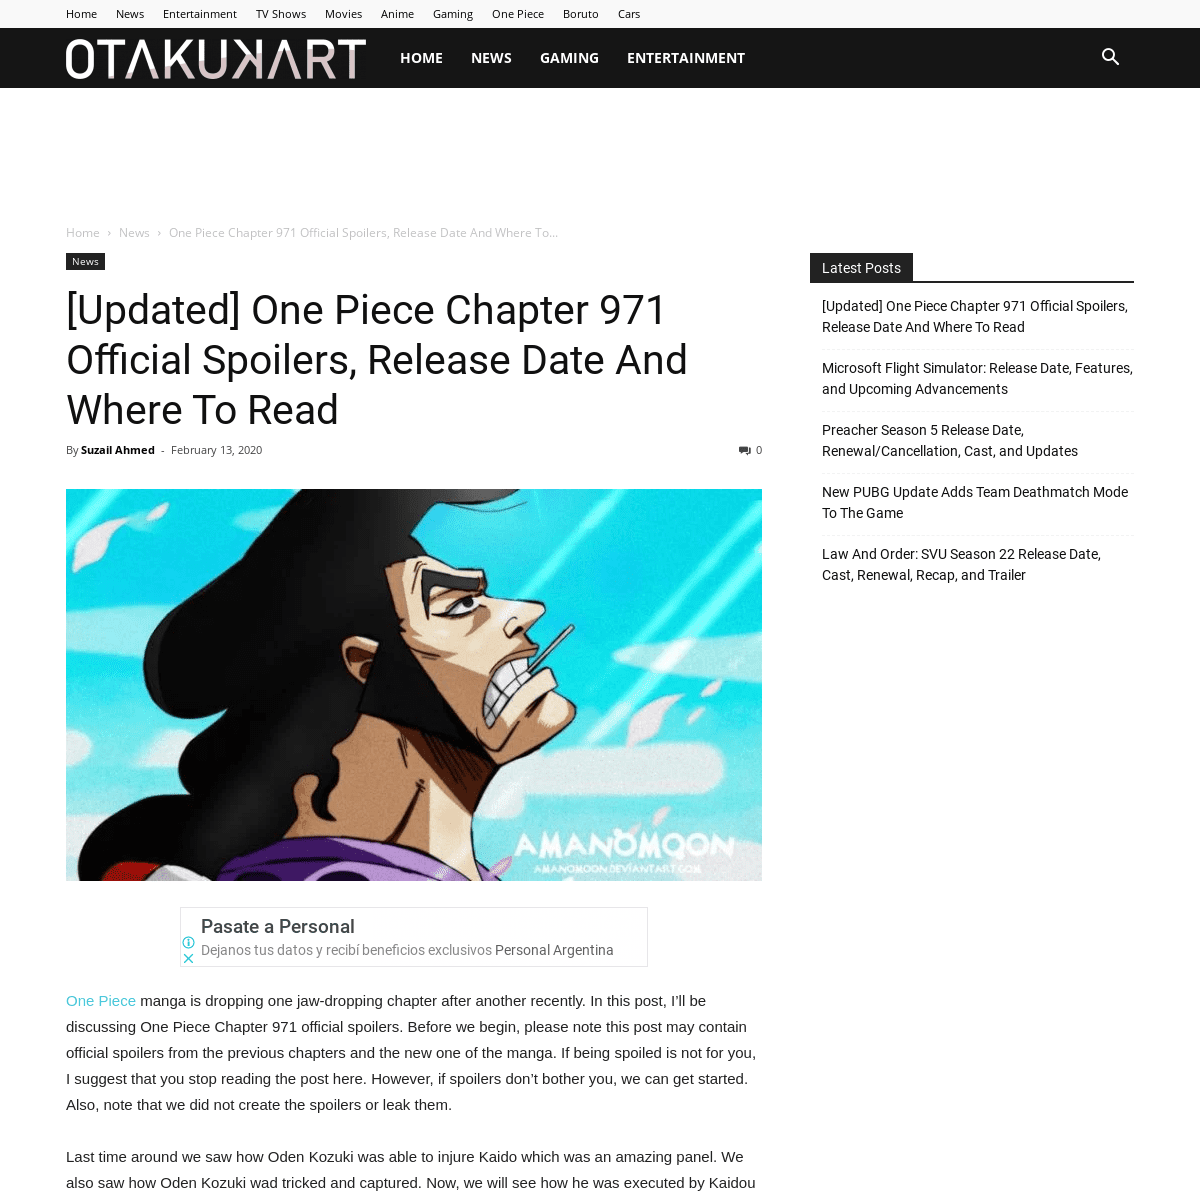 [Updated] One Piece Chapter 971 Official Spoilers, Release Date And Where To Read - OtakuKart